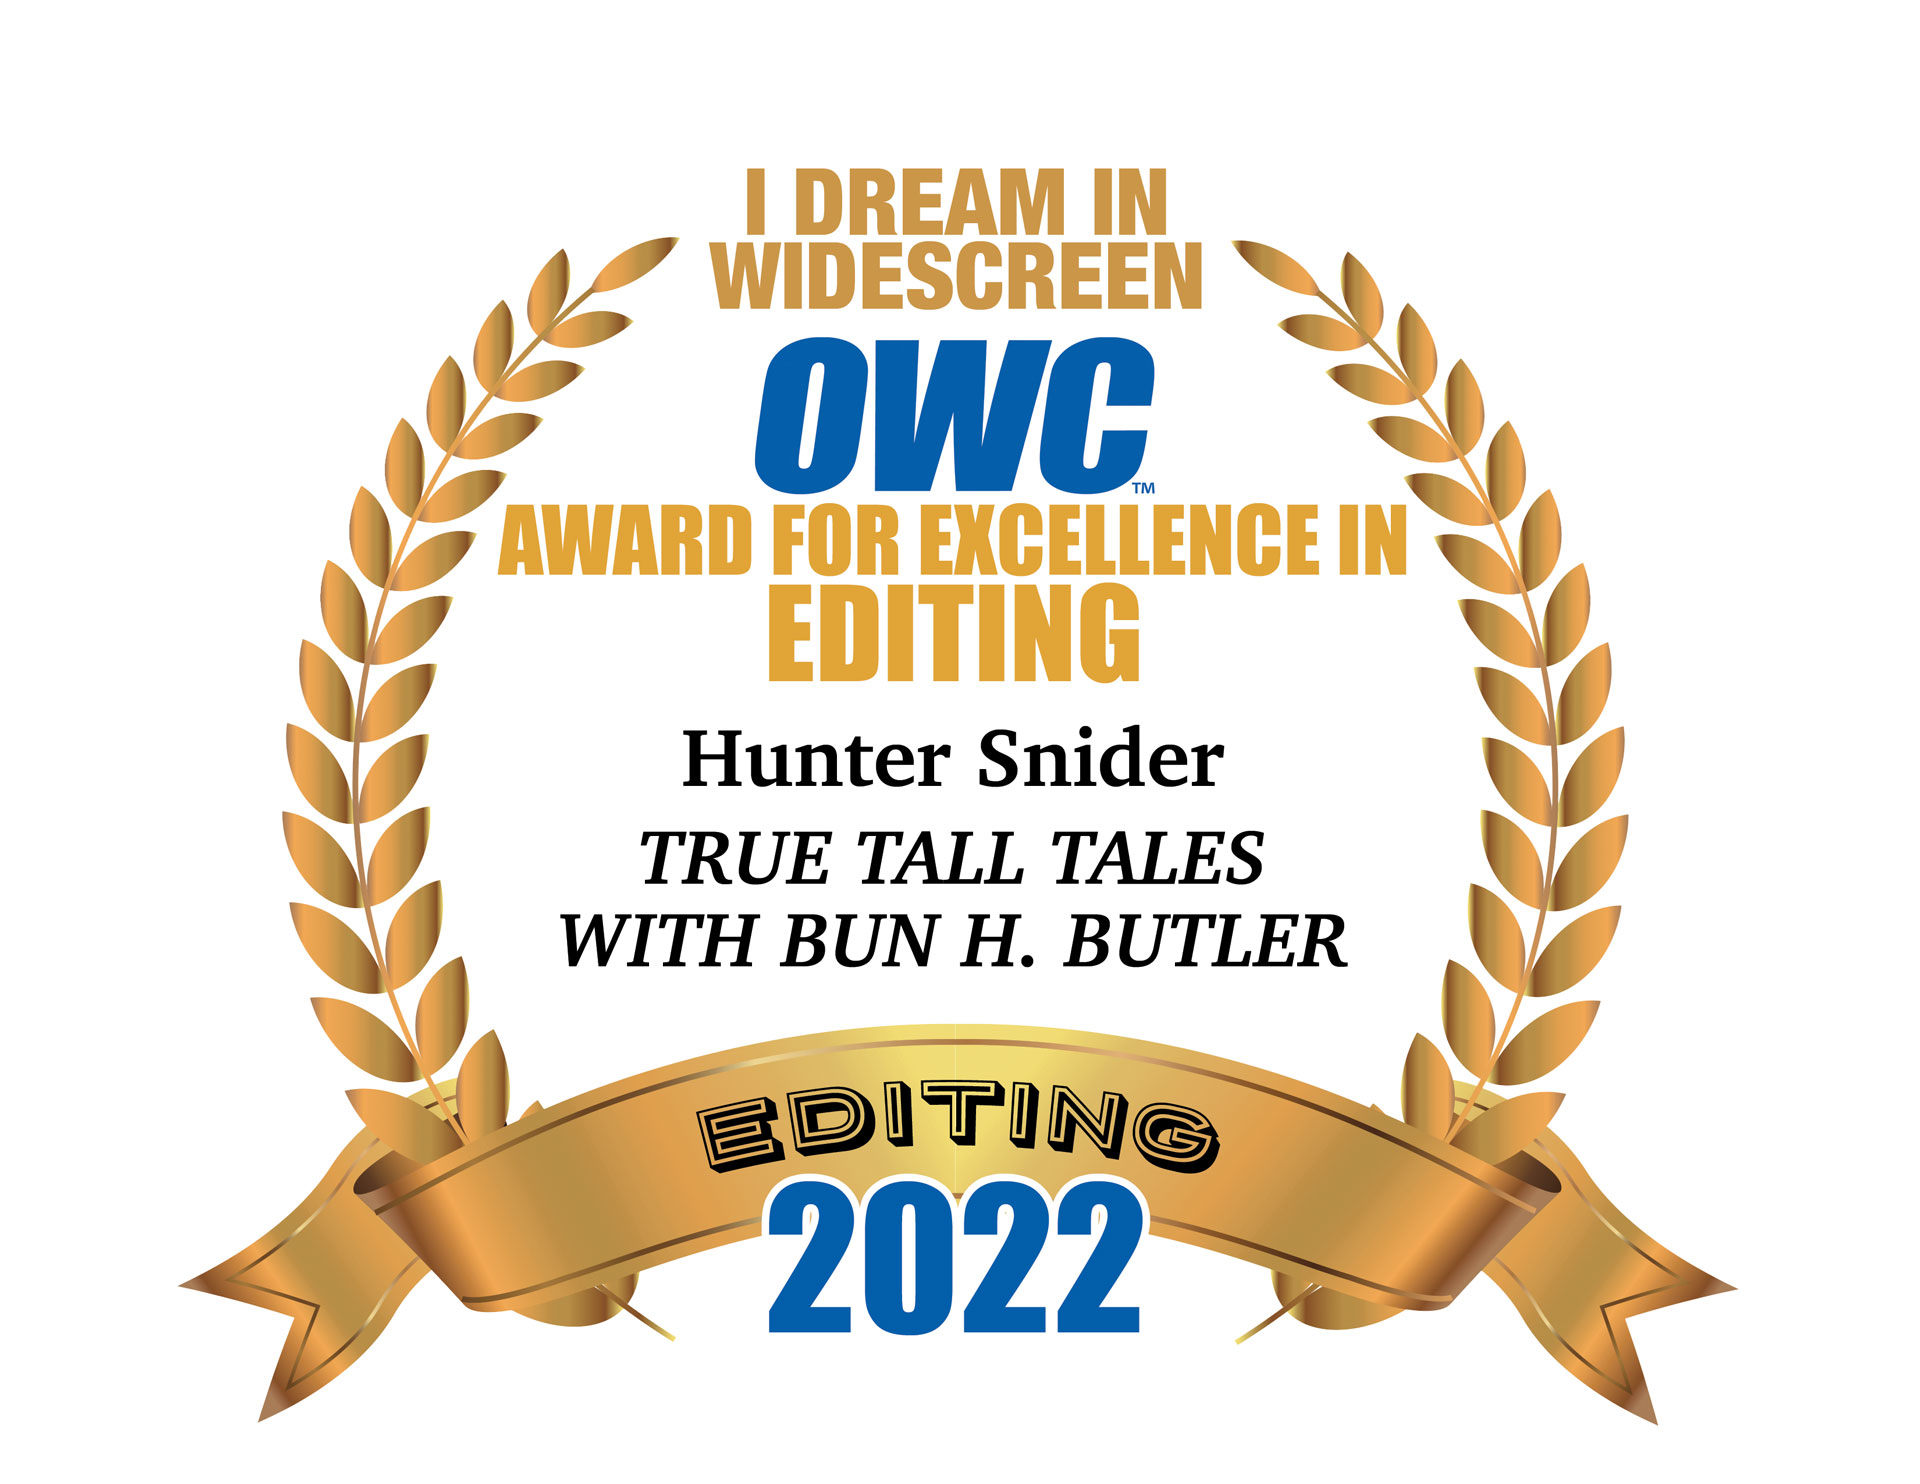 OWC Award for Excellence in Editing